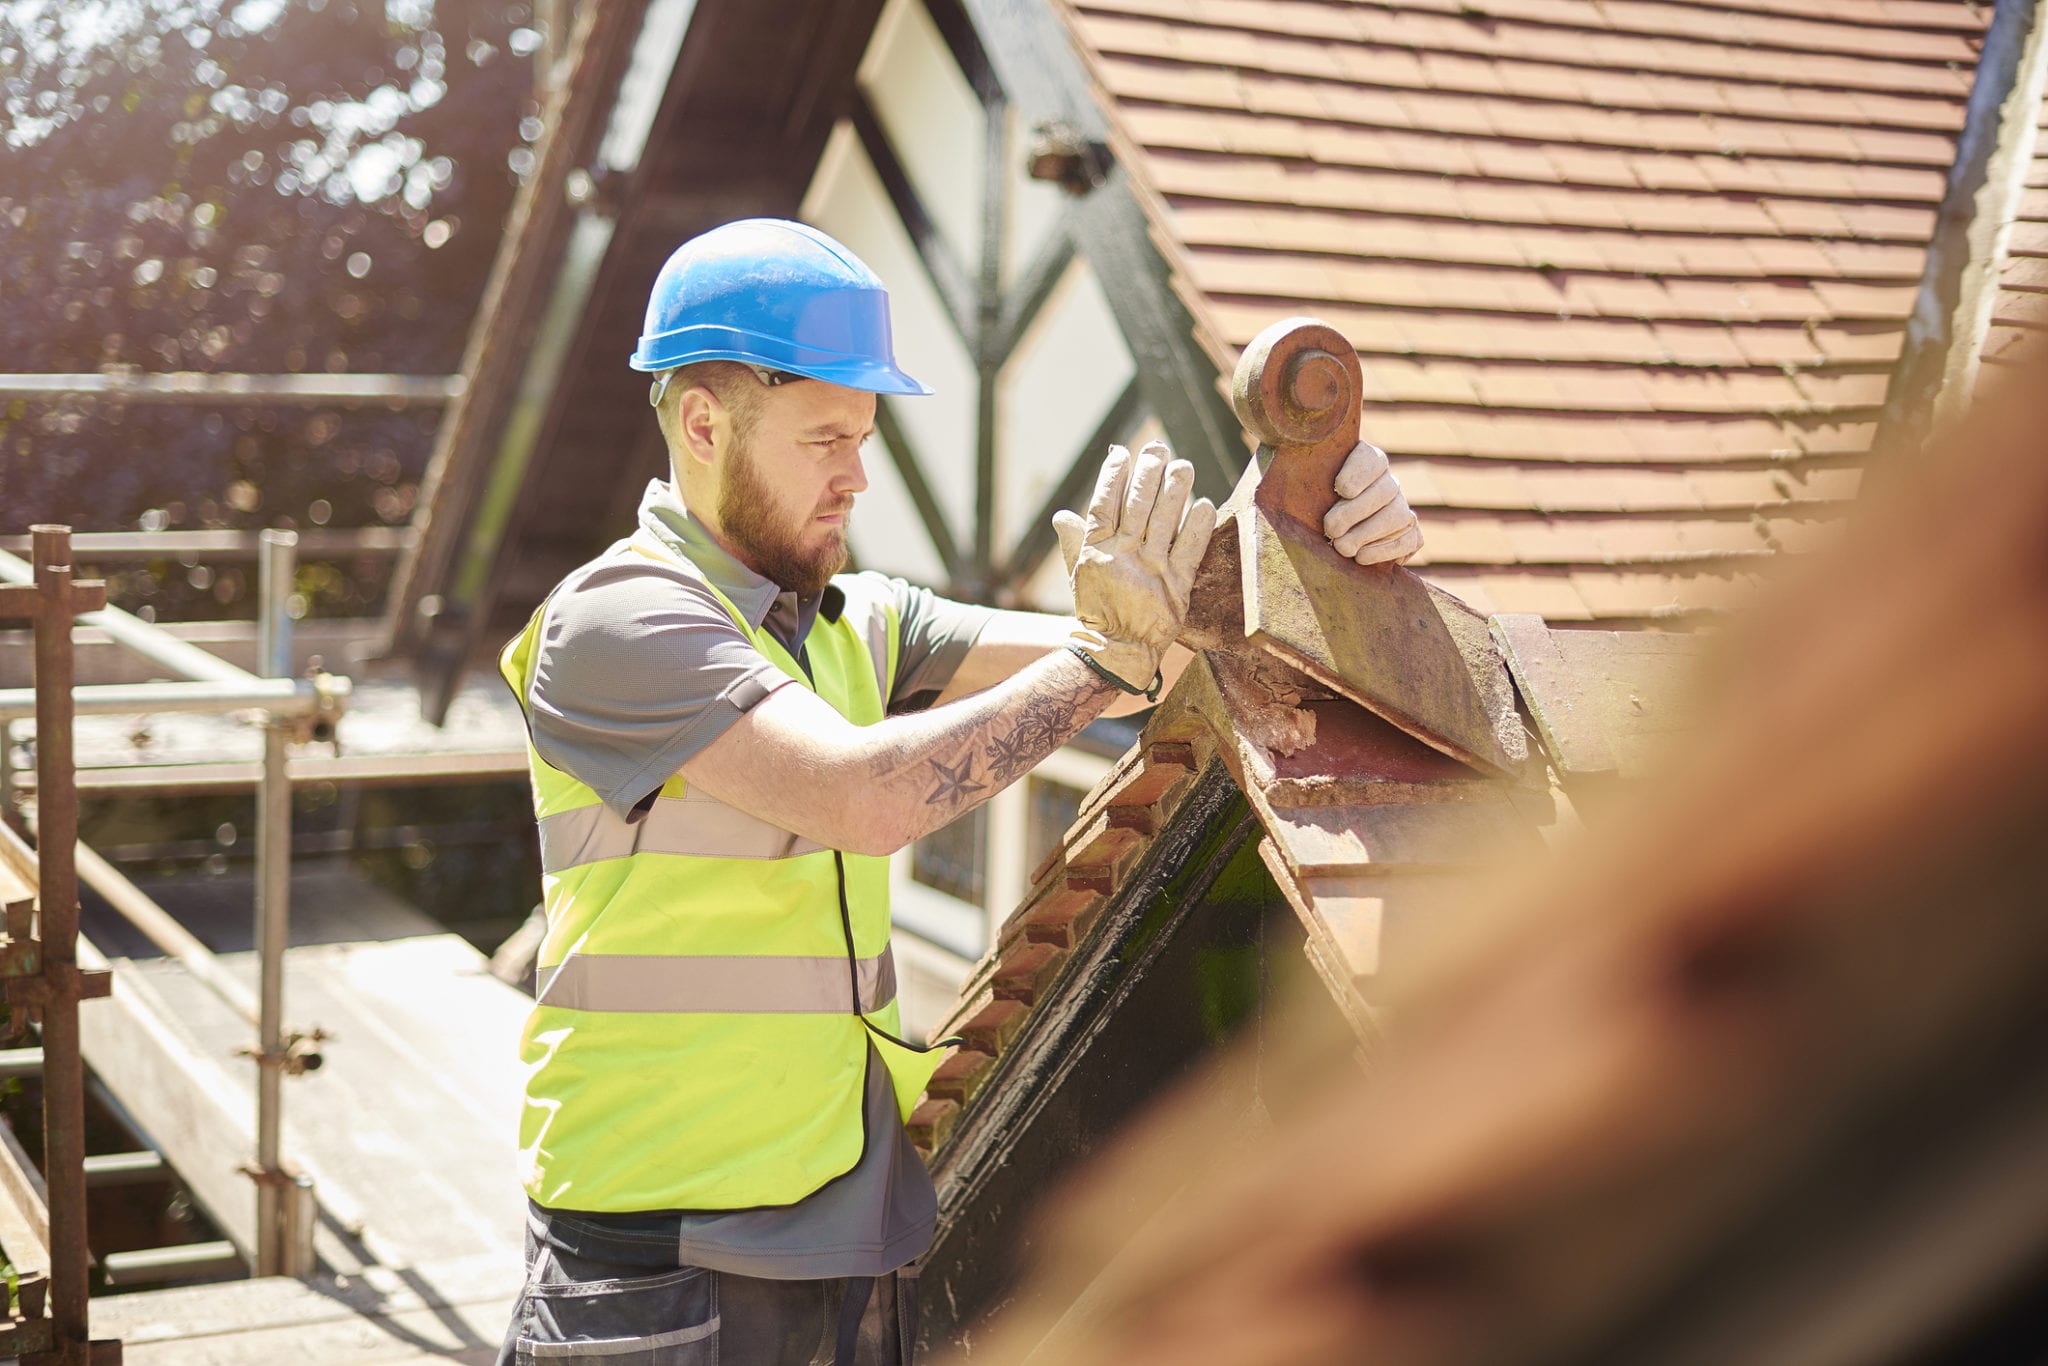 Roofing Contractor Insurance That Matches the Size of Your